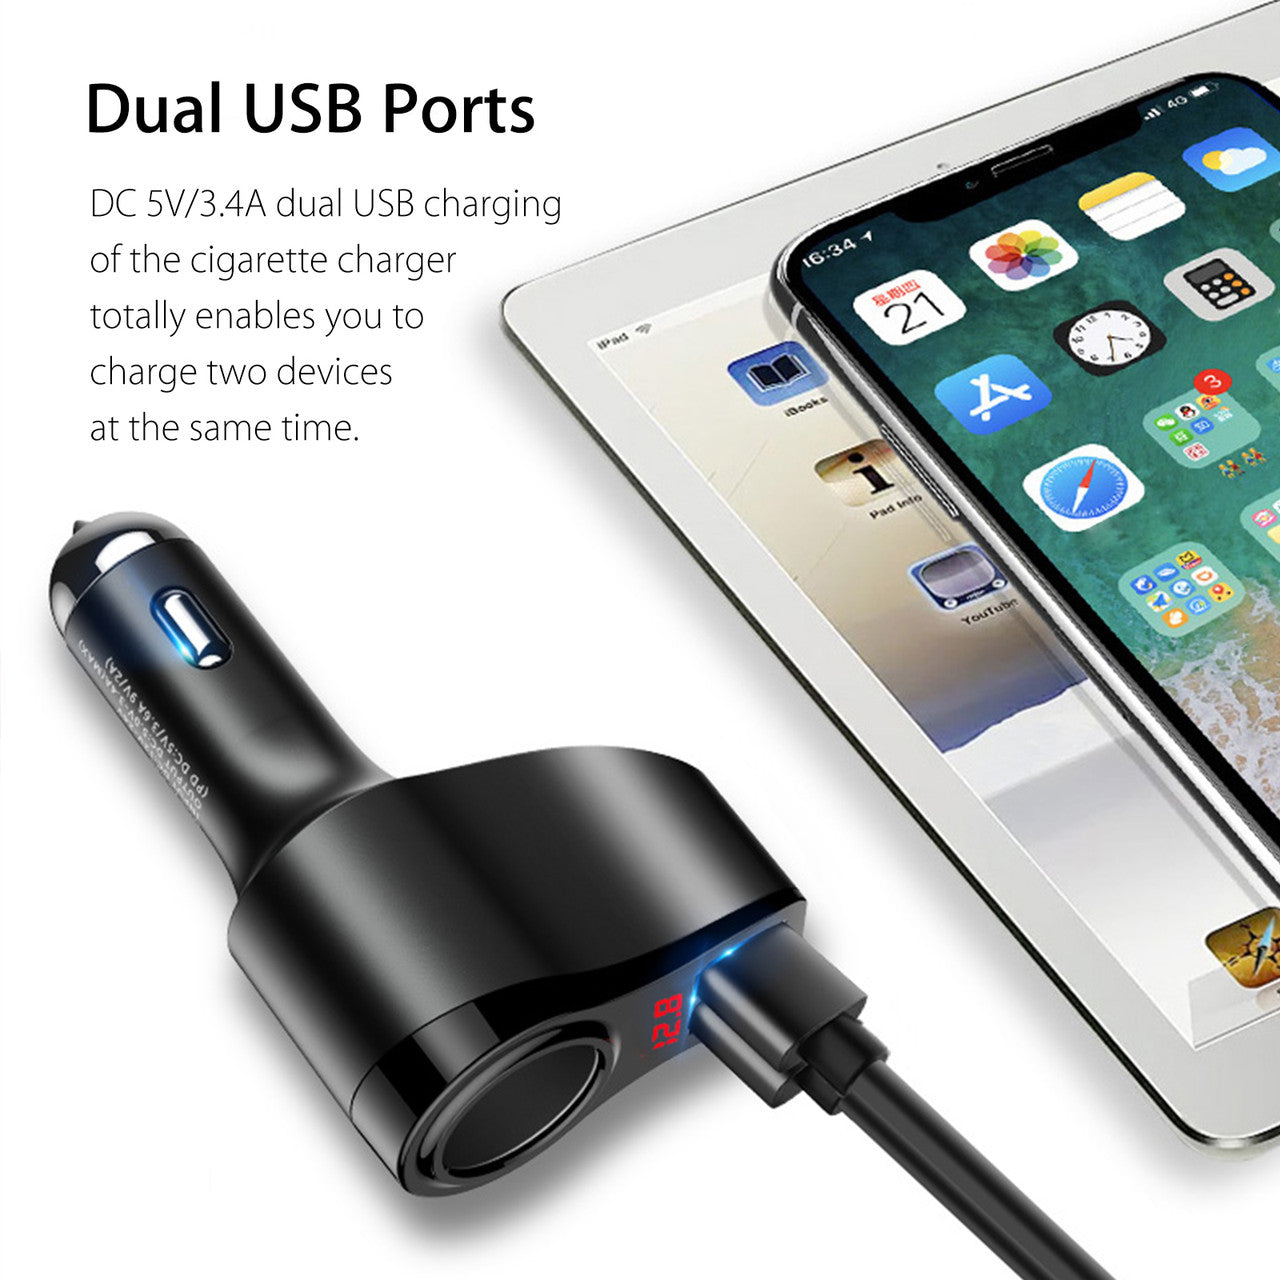 Car Charger Adapter Cigarette Lighter Socket Splitter 12V/24V, Dual USB Charge 5V 3.4A with Real-Time Voltage Display or 2 USB DC 5V/3.4A with Type C PD Fast Charger for Macbook Samsung